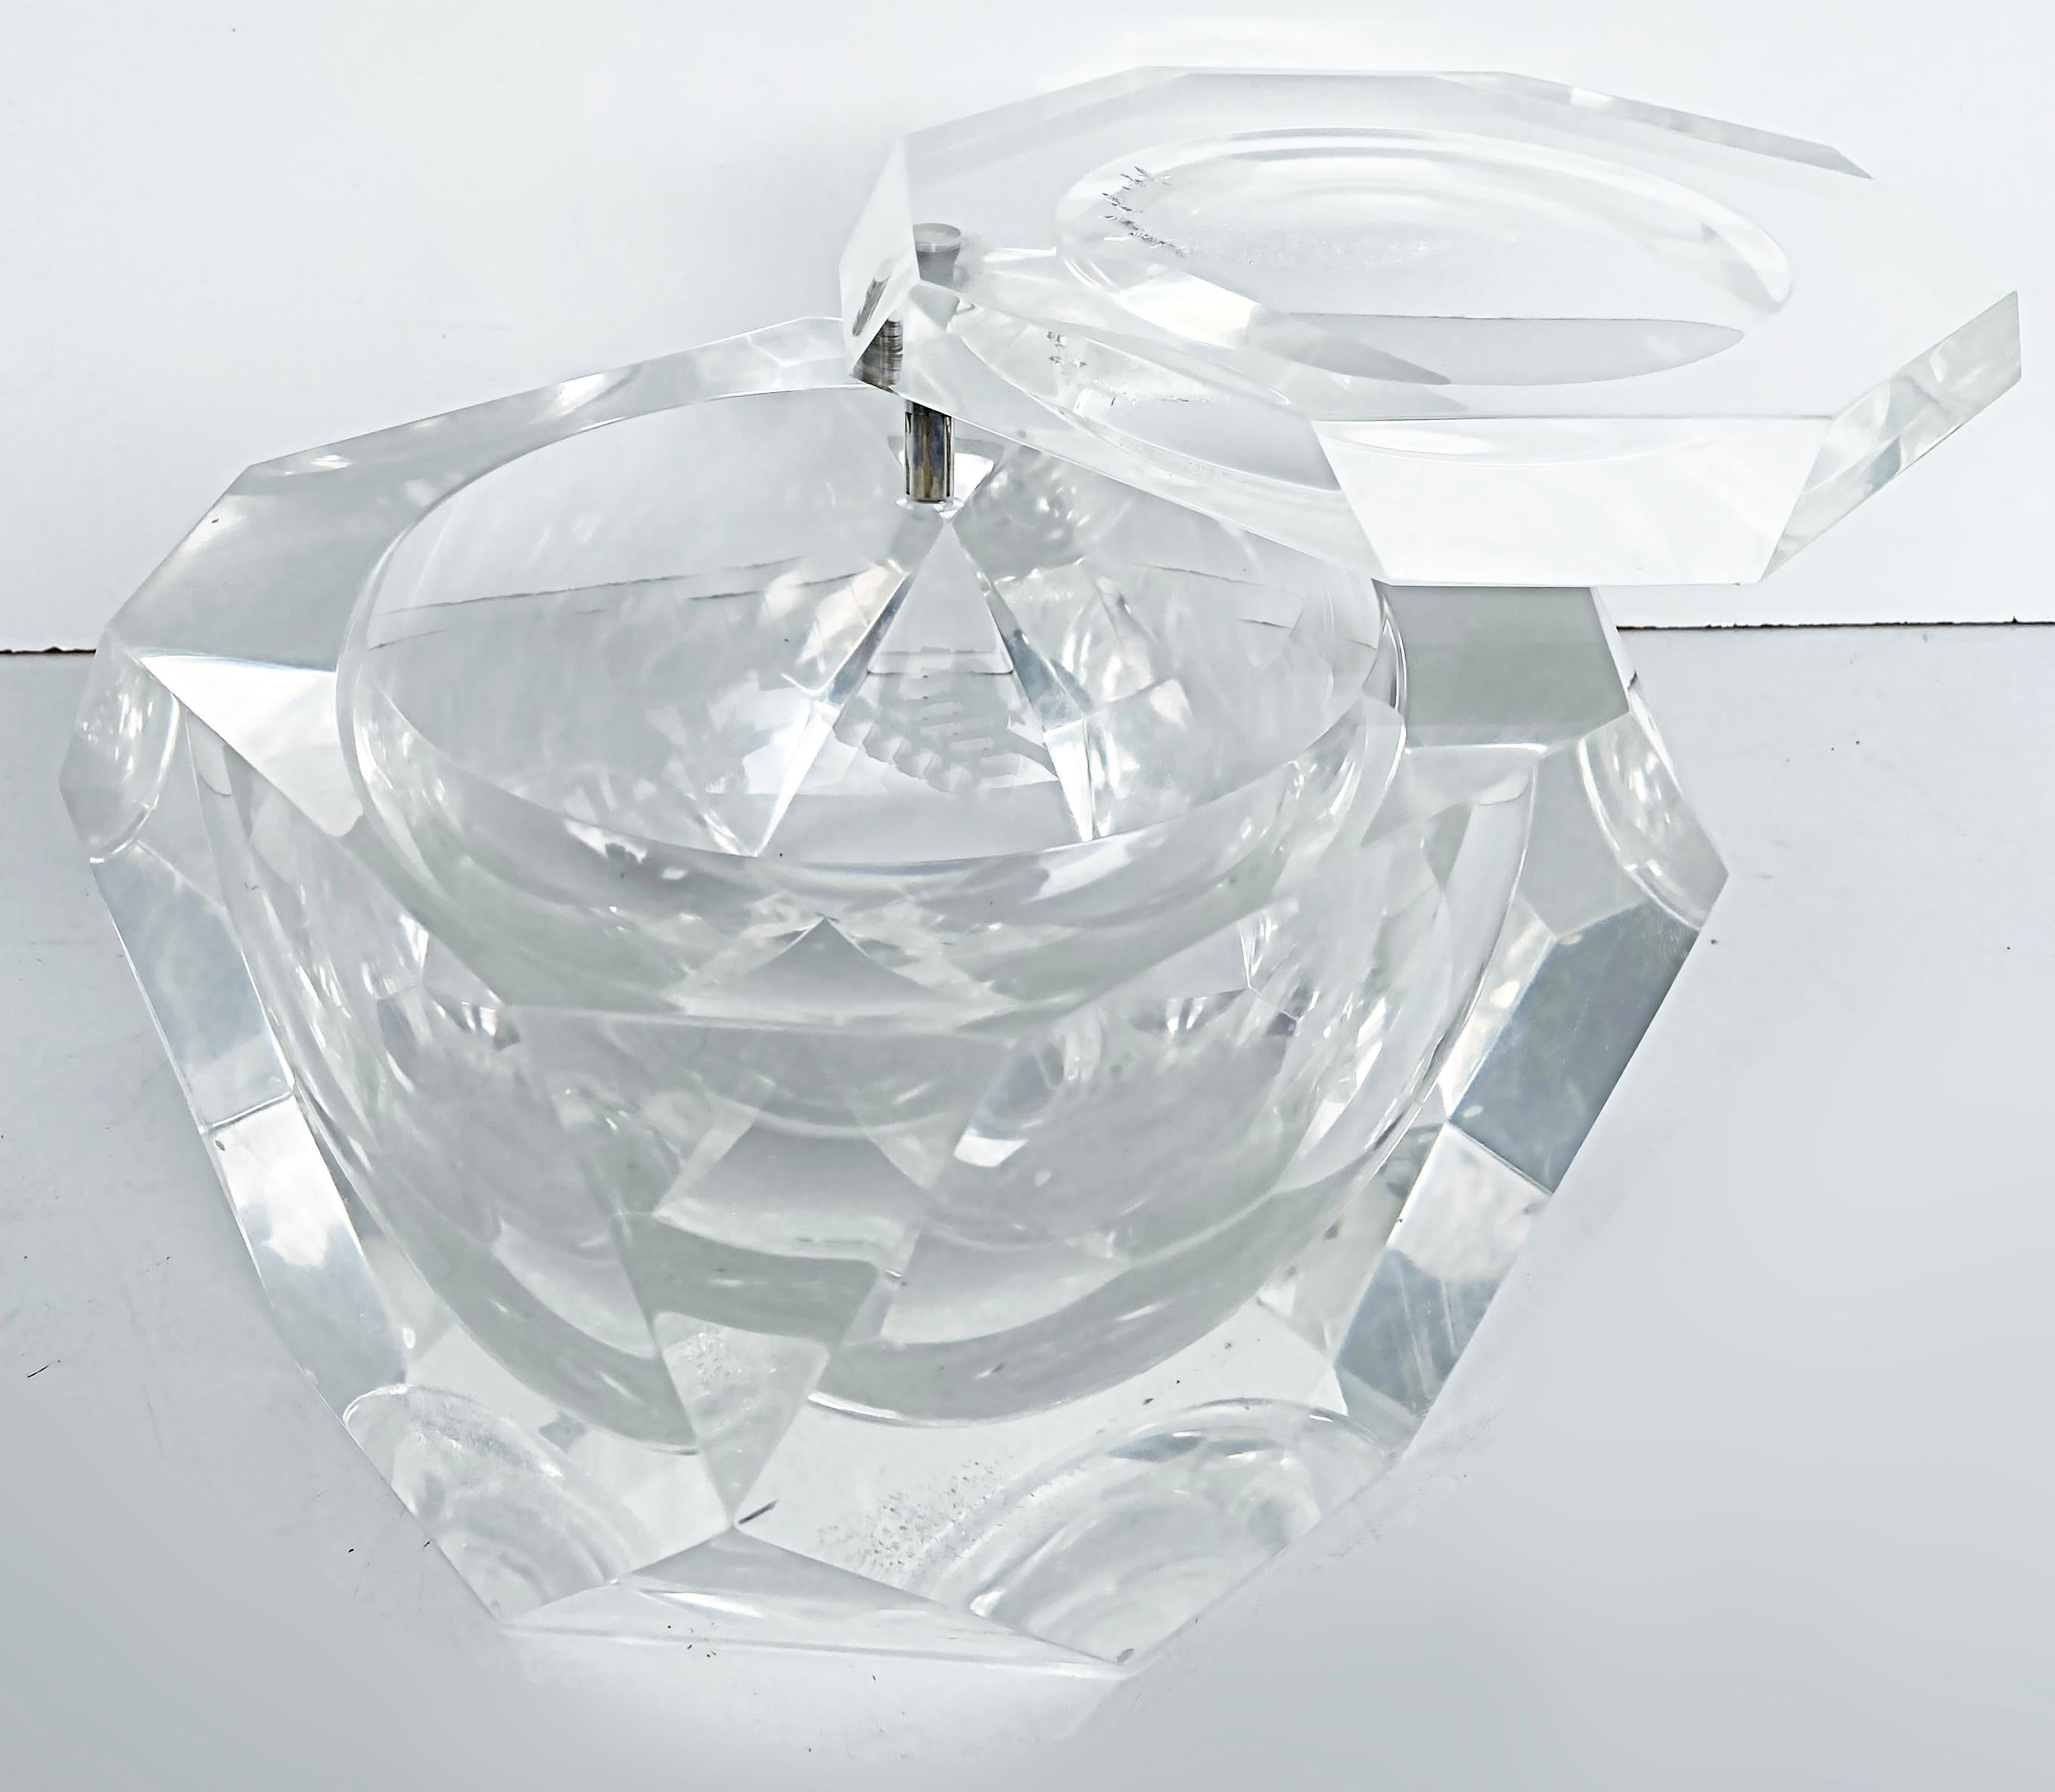 1970s Carole Stupell Faceted Swivel Top Lucite Ice Bucket, Octagonal

This elegant Mid-Century Modern octagonal ice bucket was created by the designer Carol Stupell, circa 1970. It features a faceted body and top composed of faceted translucent